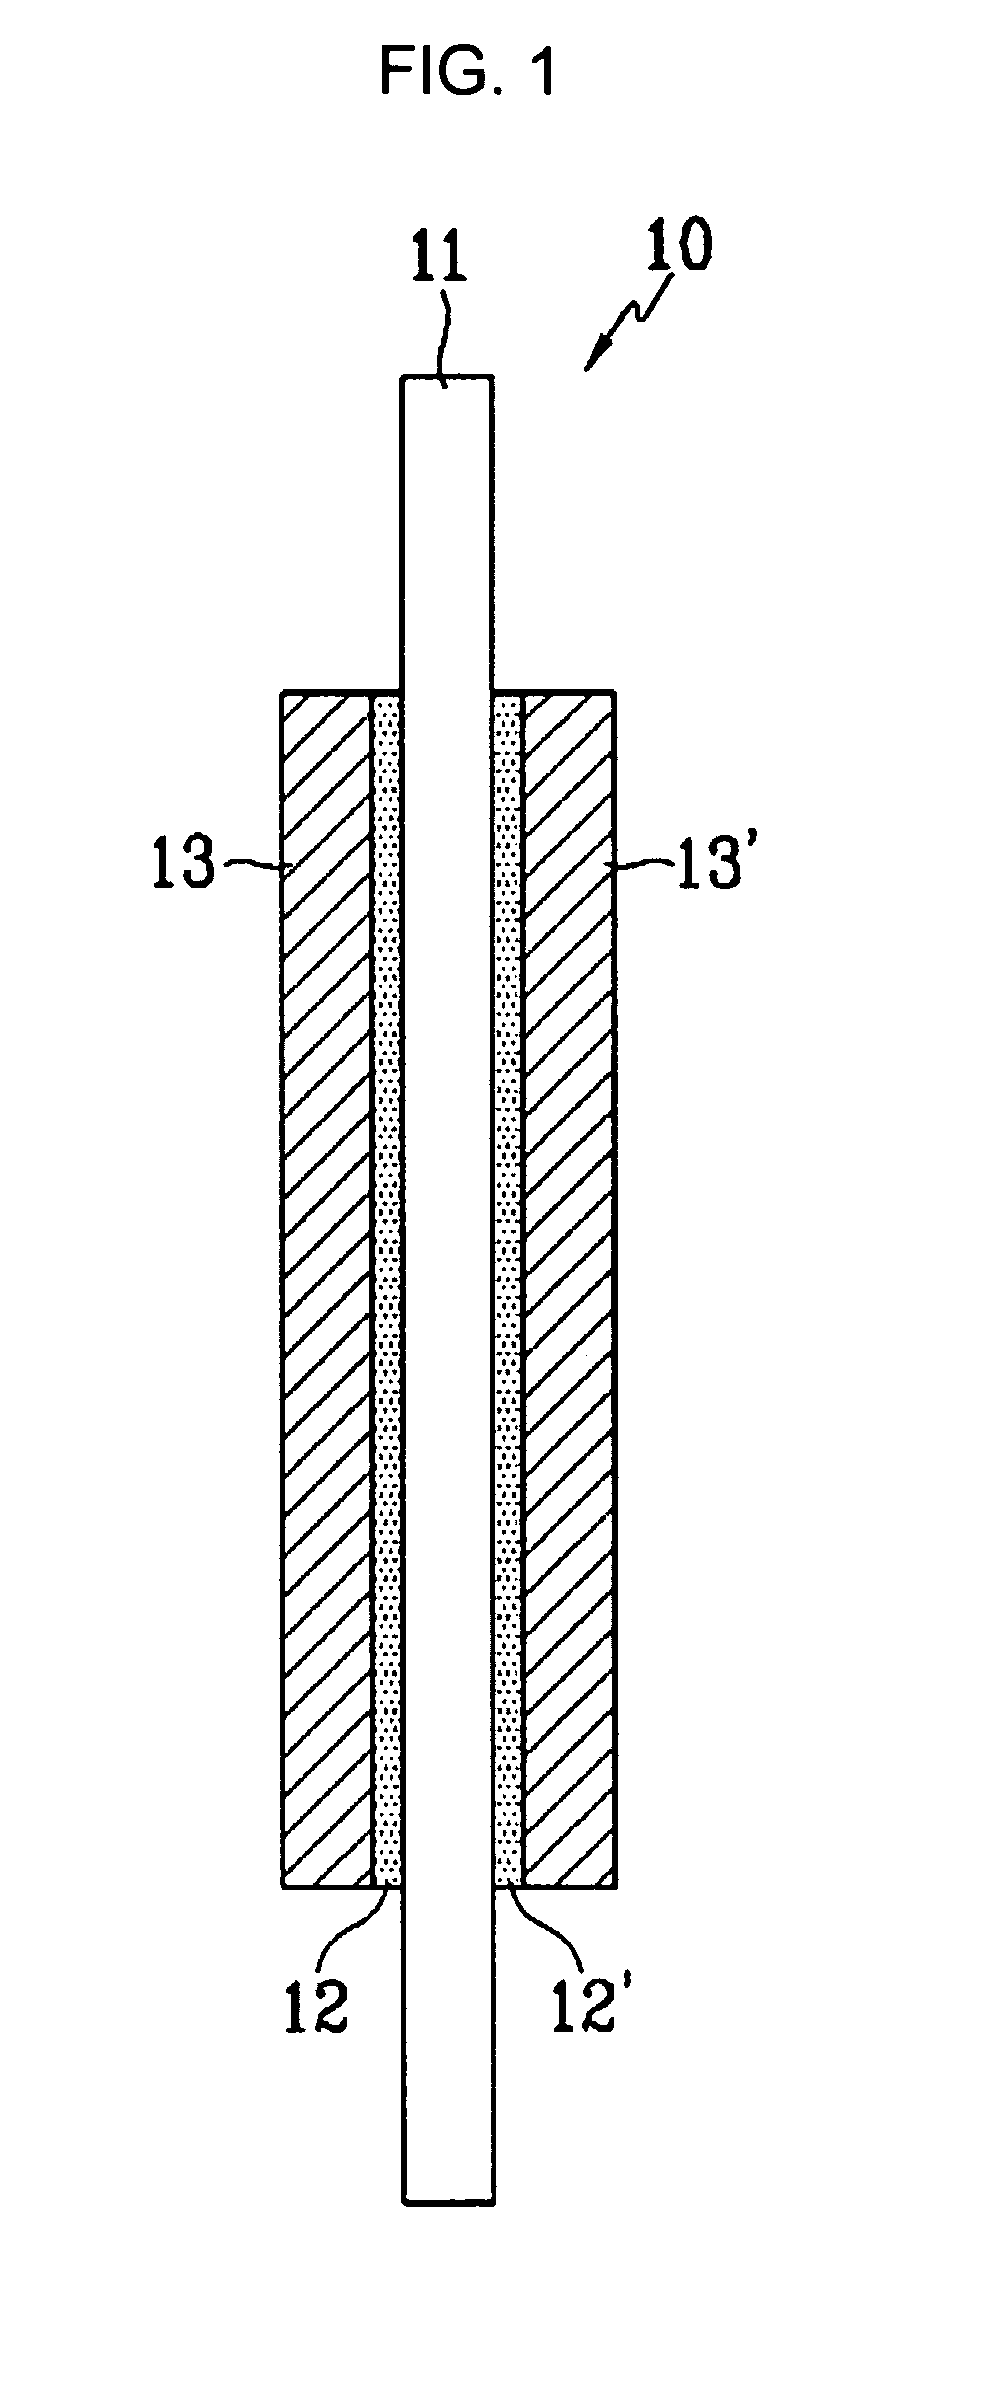 Crosslinkable sulfonated copolymer and fuel cell including polymeric composition of the same